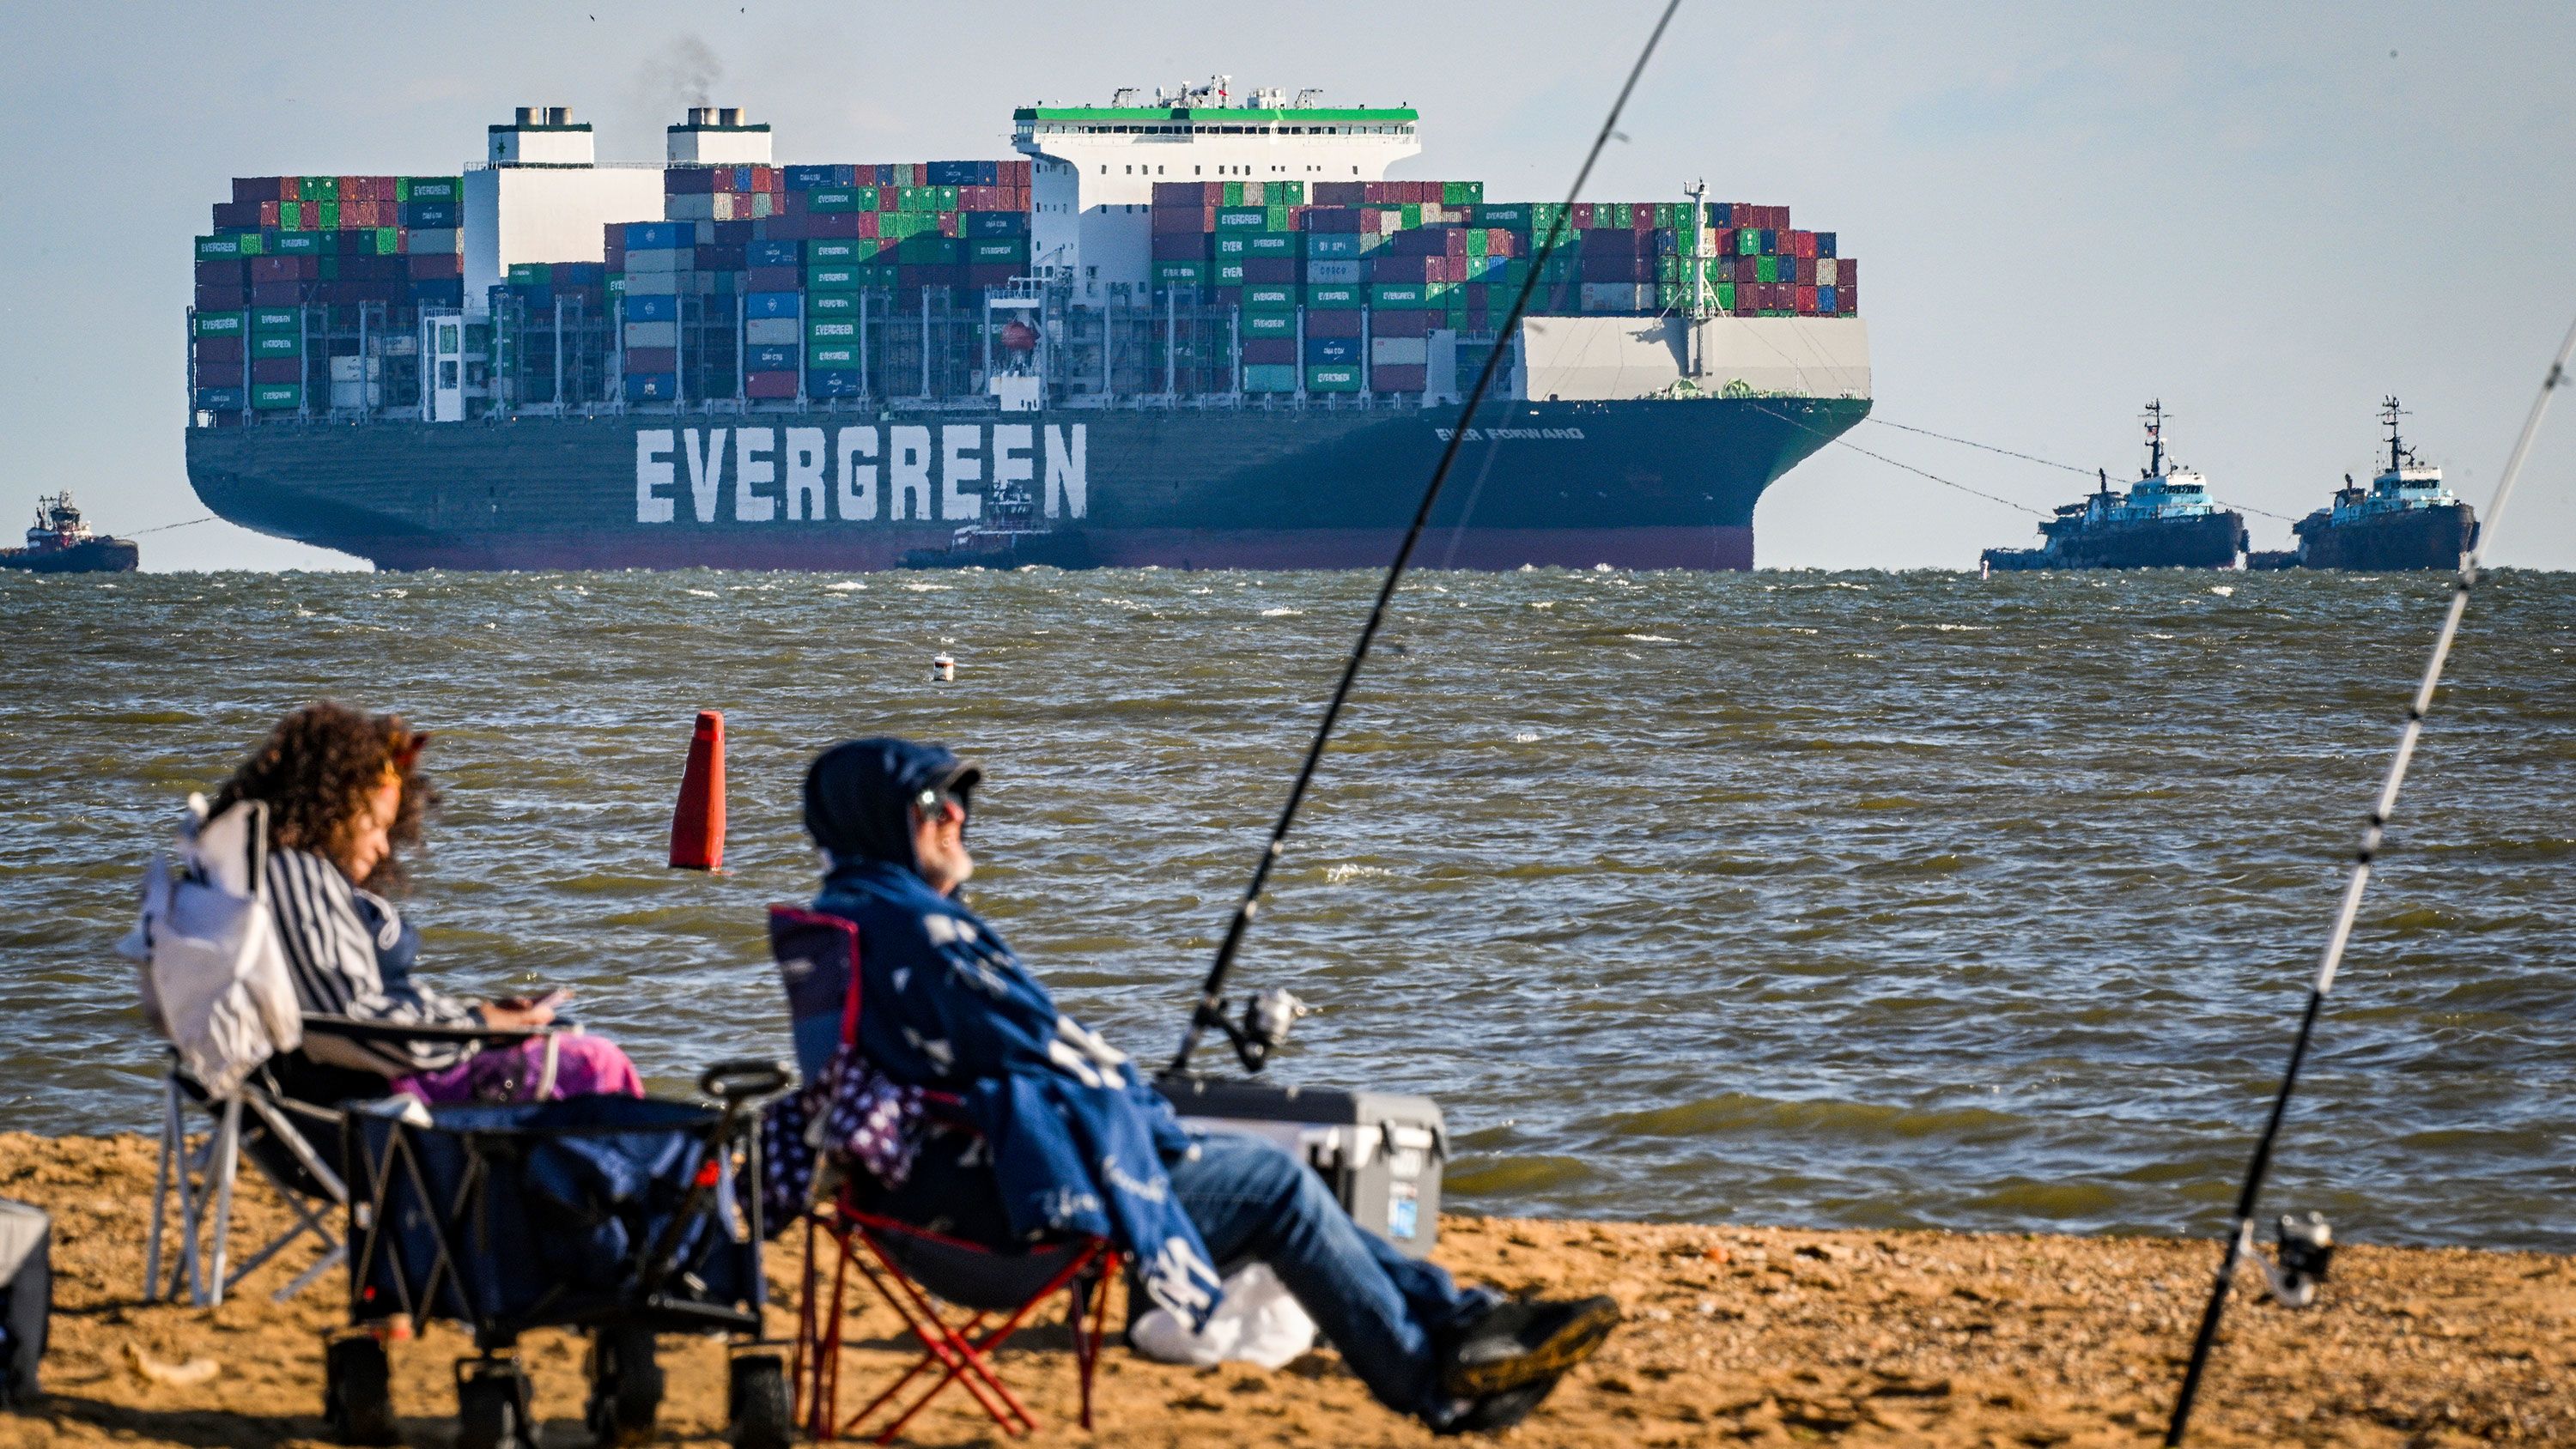 Evergreen container ship freed after a month aground in Chesapeake